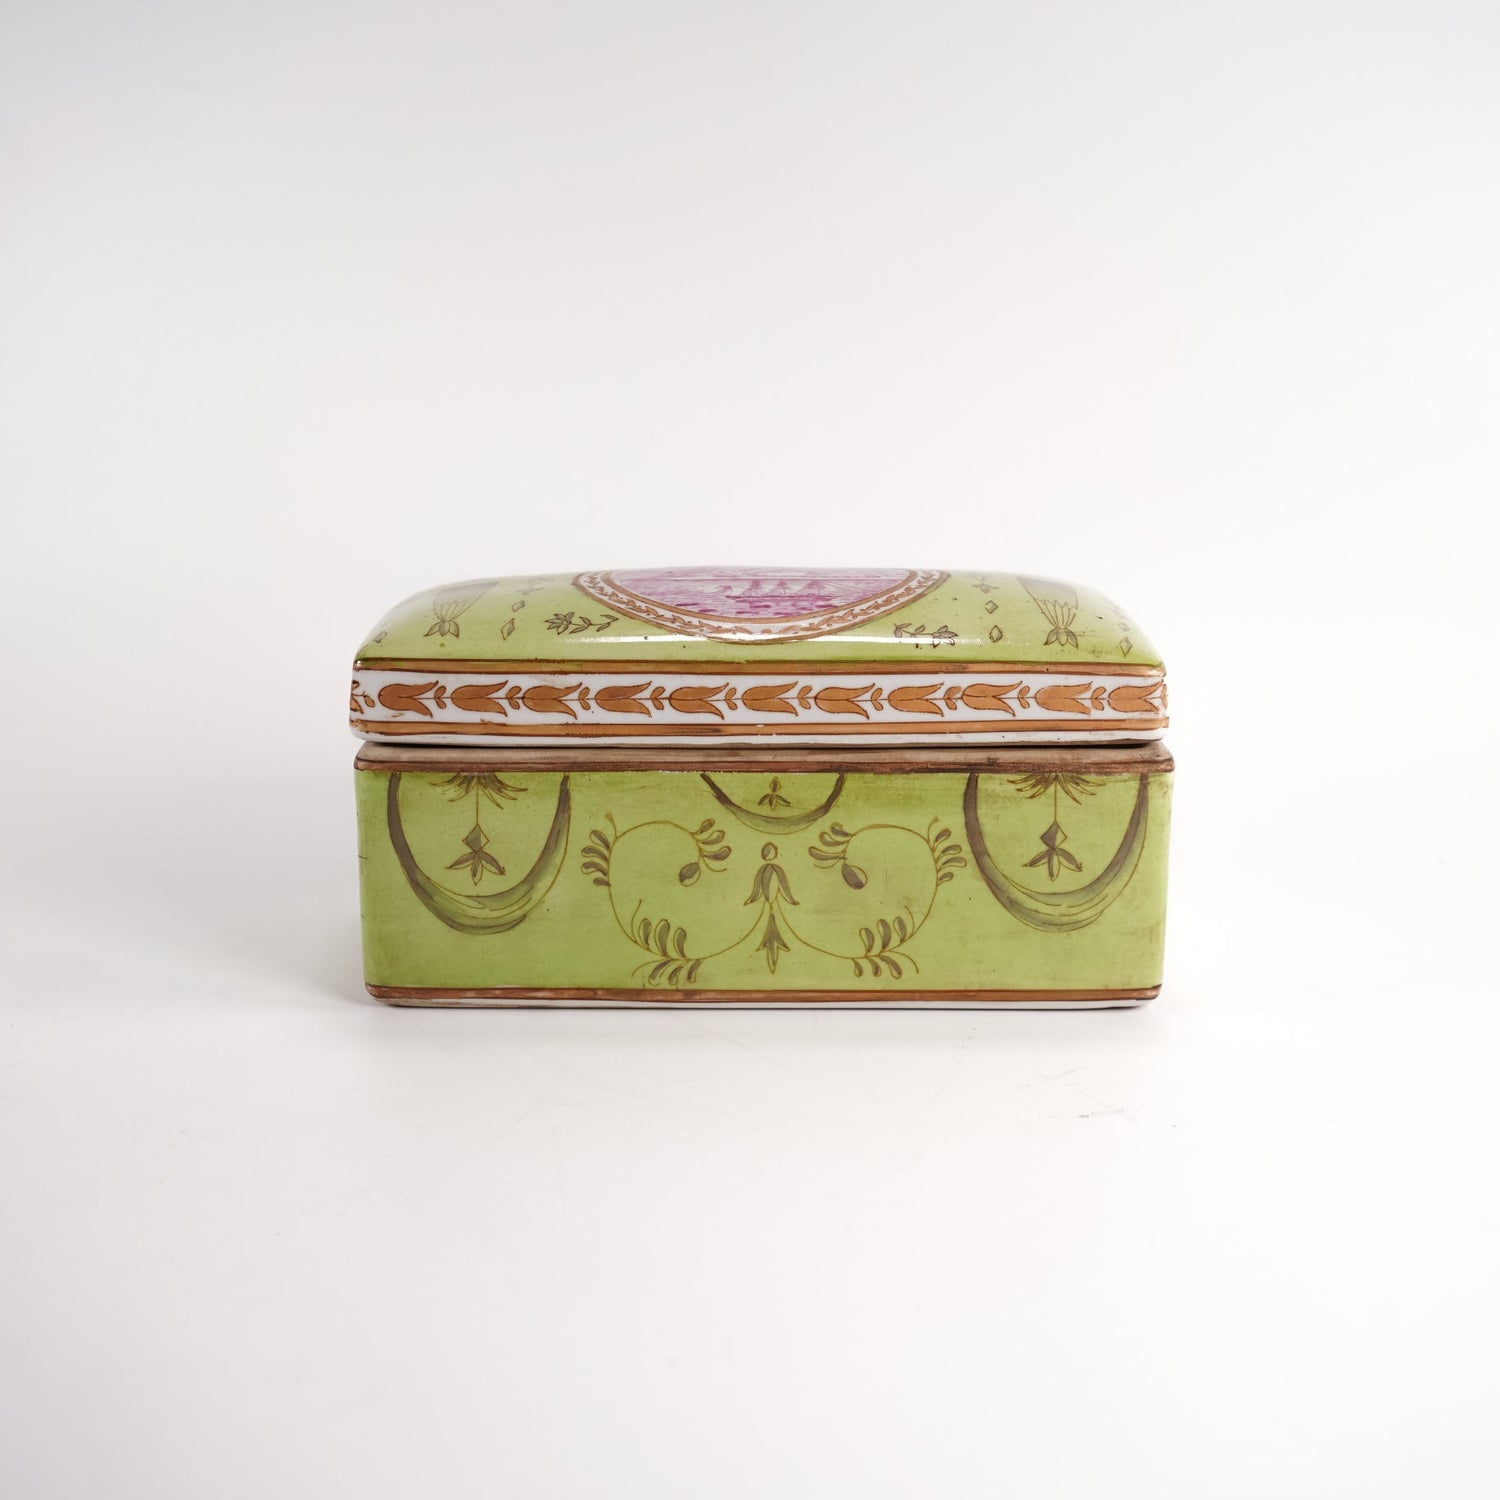 Antique Porcelain Hand Painted Box - Sirdab - Unknown